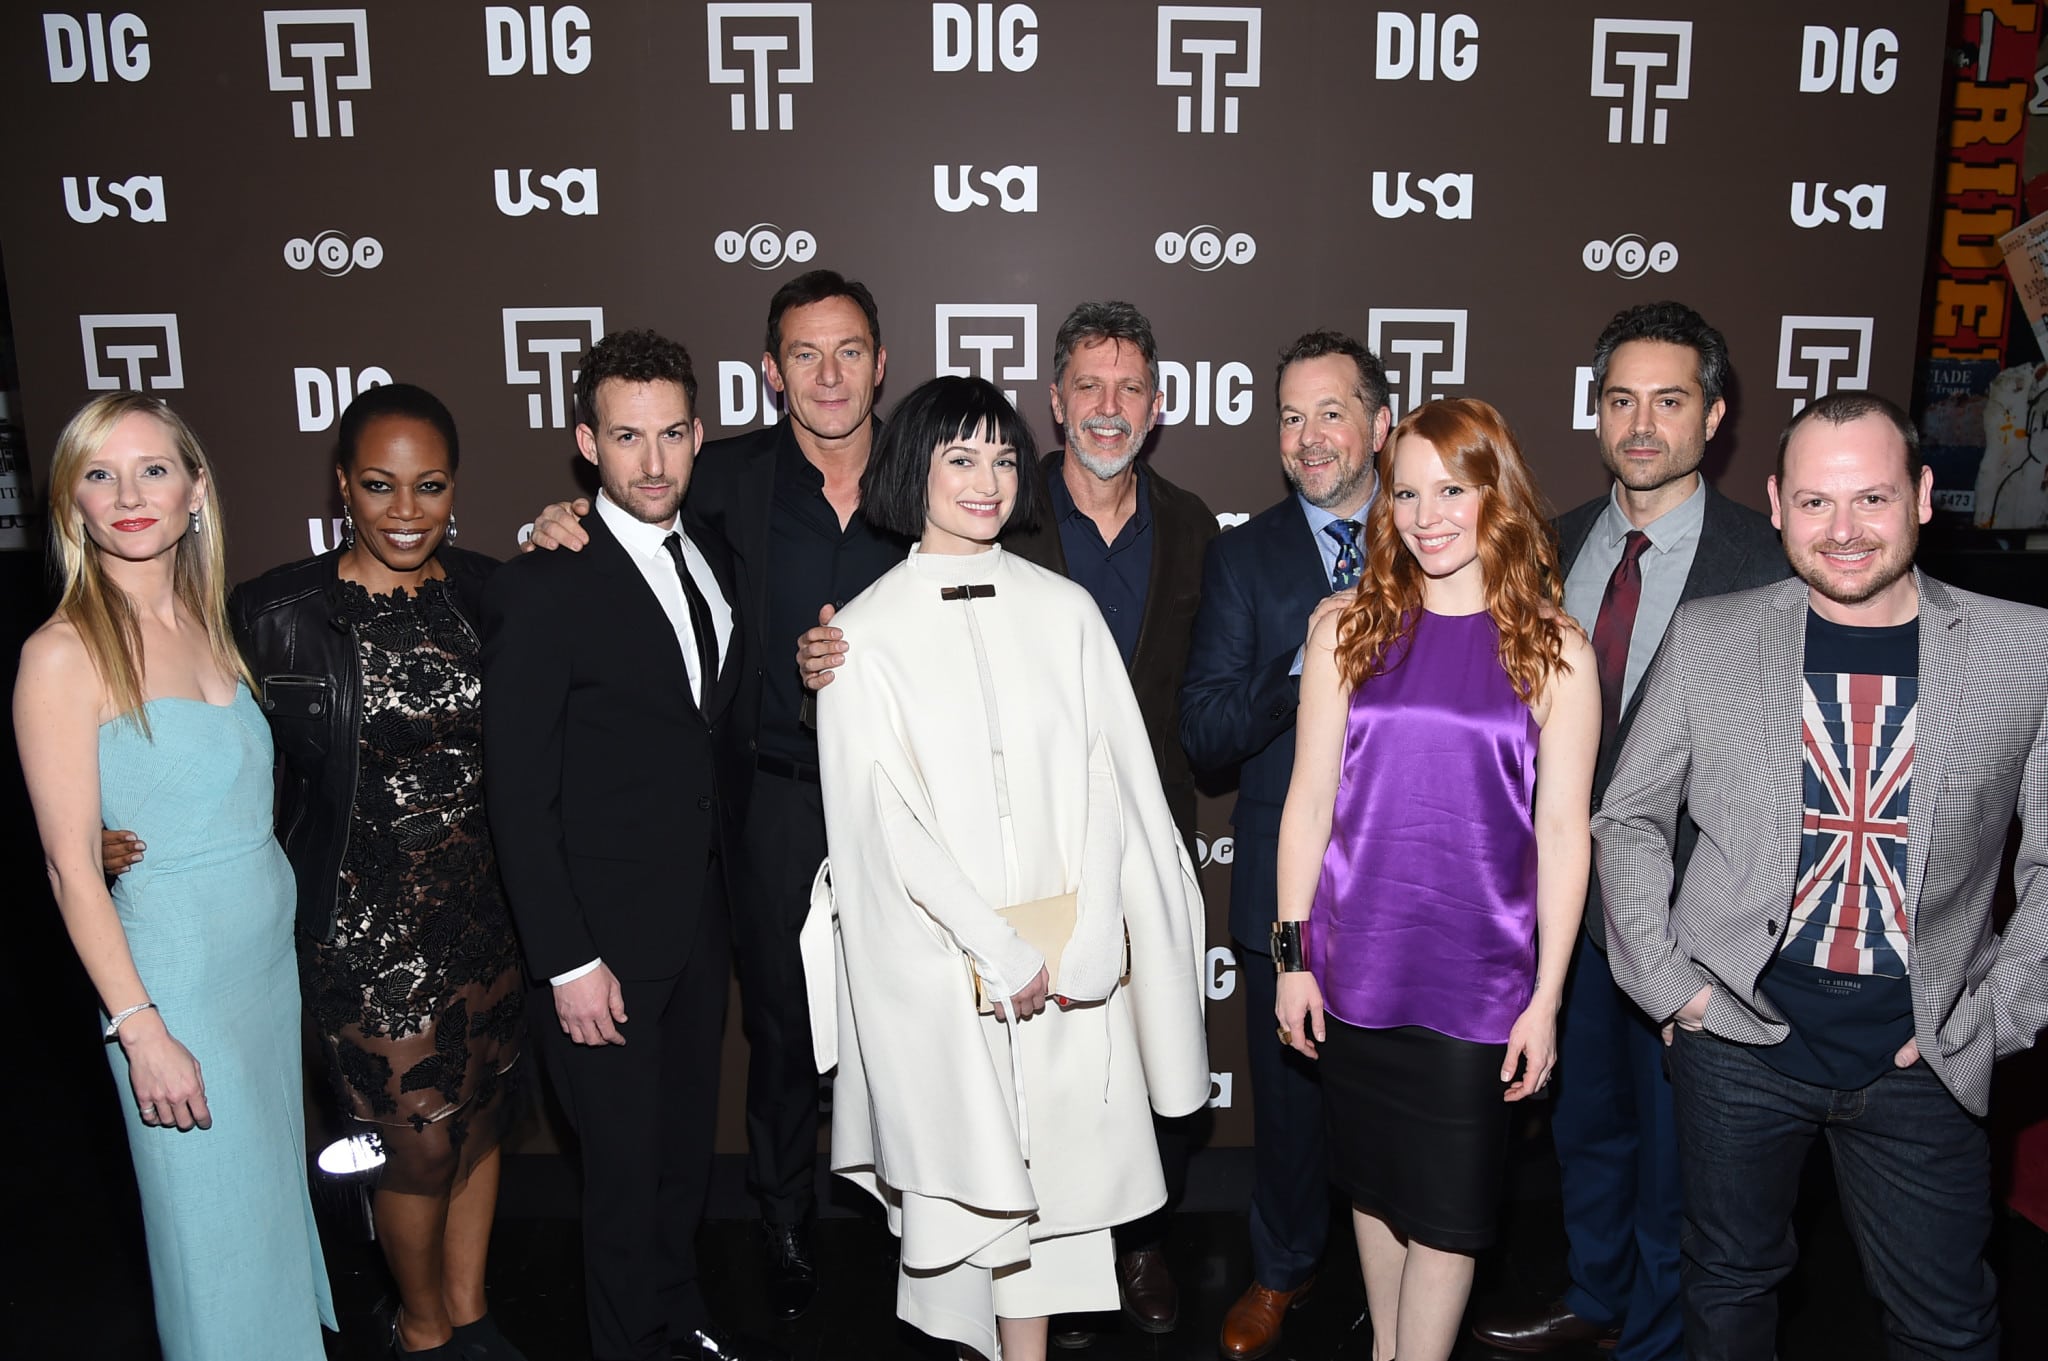 Talking USA Network's 'Dig' With Co-creator Tim Kring